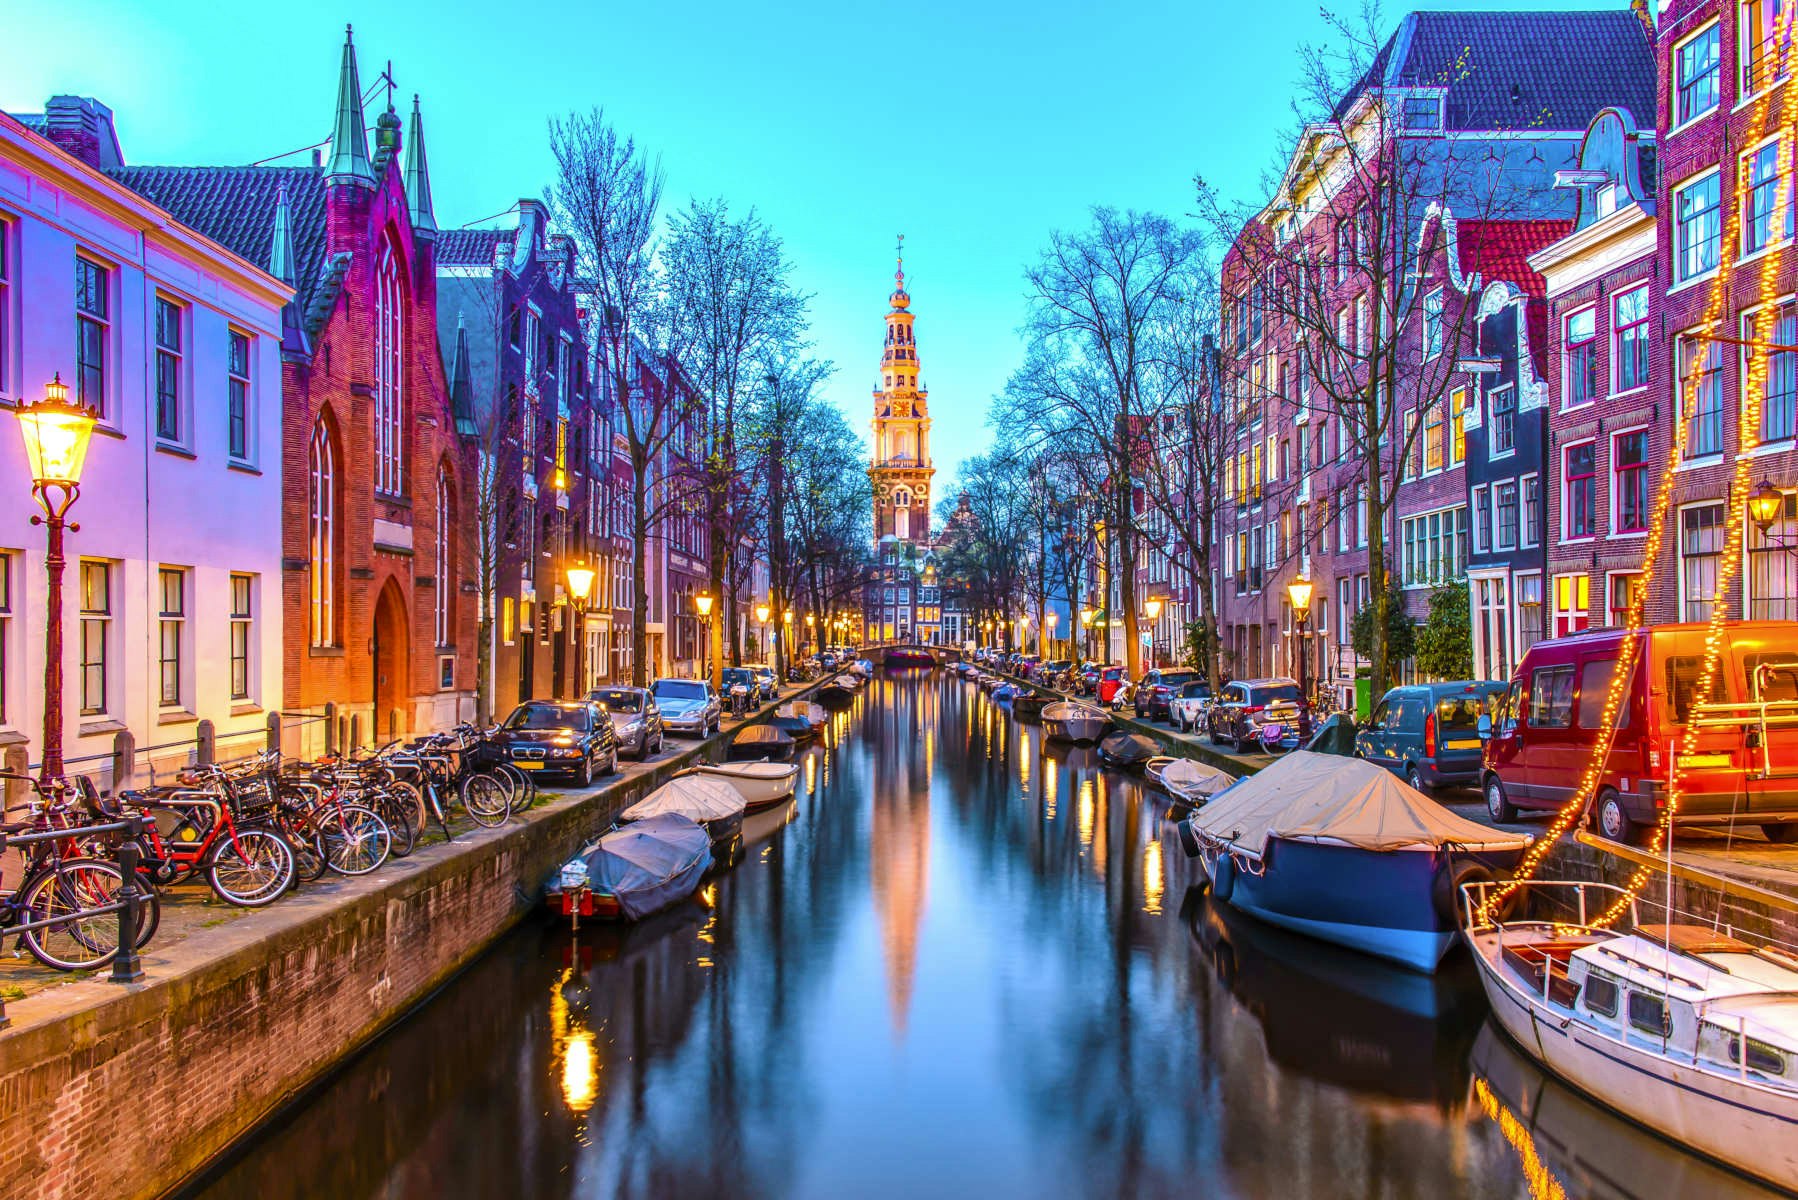 A view of a canal in Amsterdam by night.